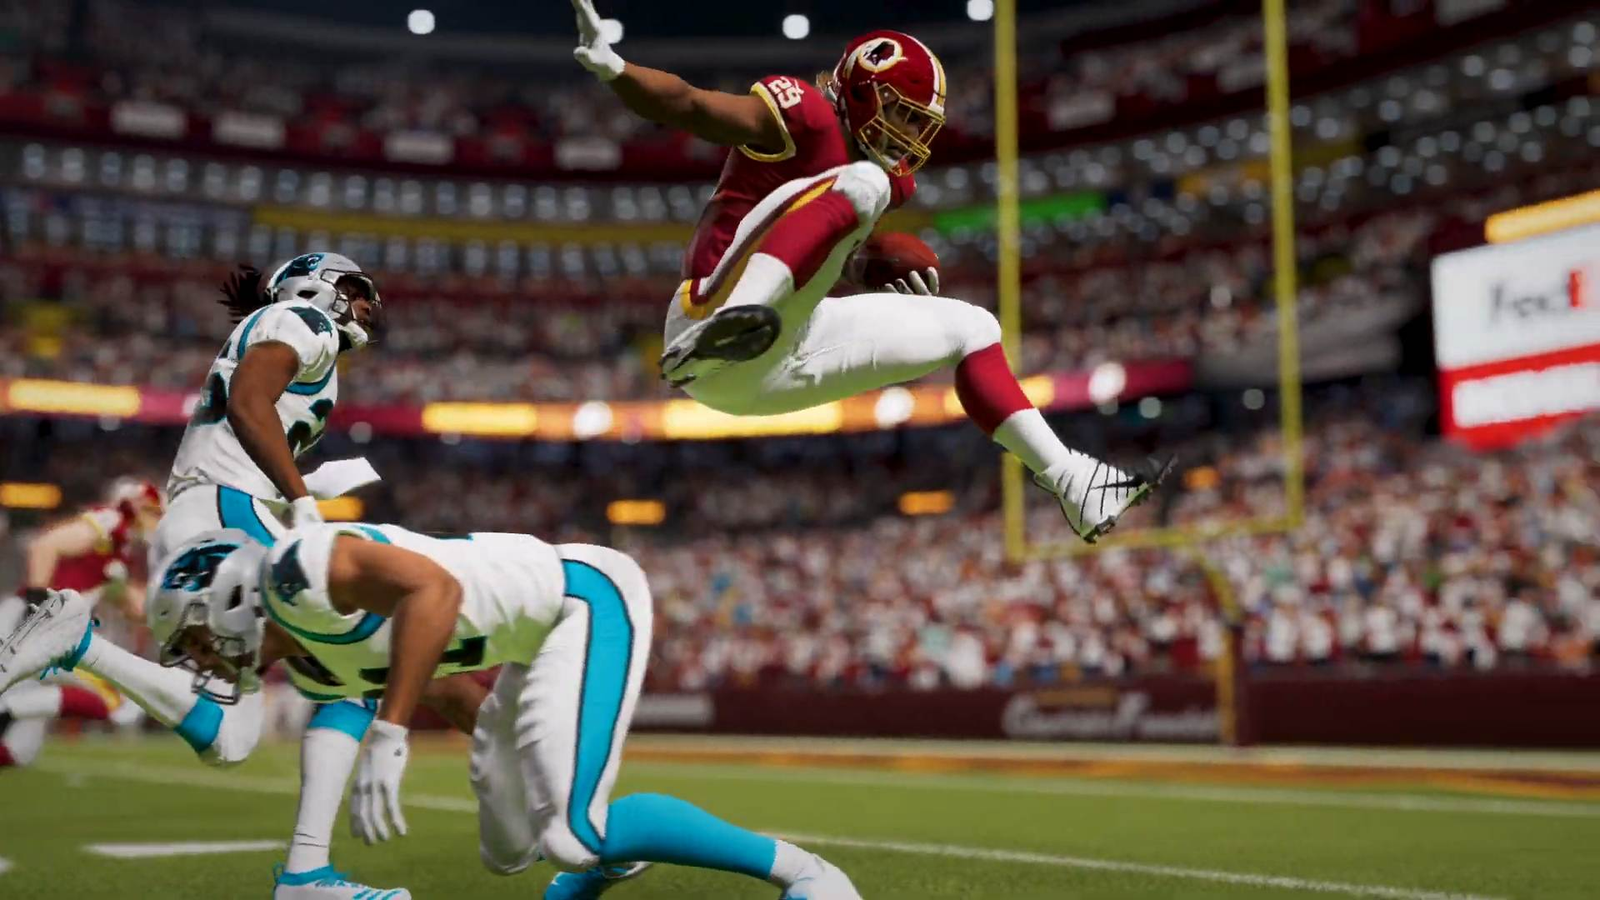 Title Update 2 is Live Now! - EA SPORTS MADDEN NFL